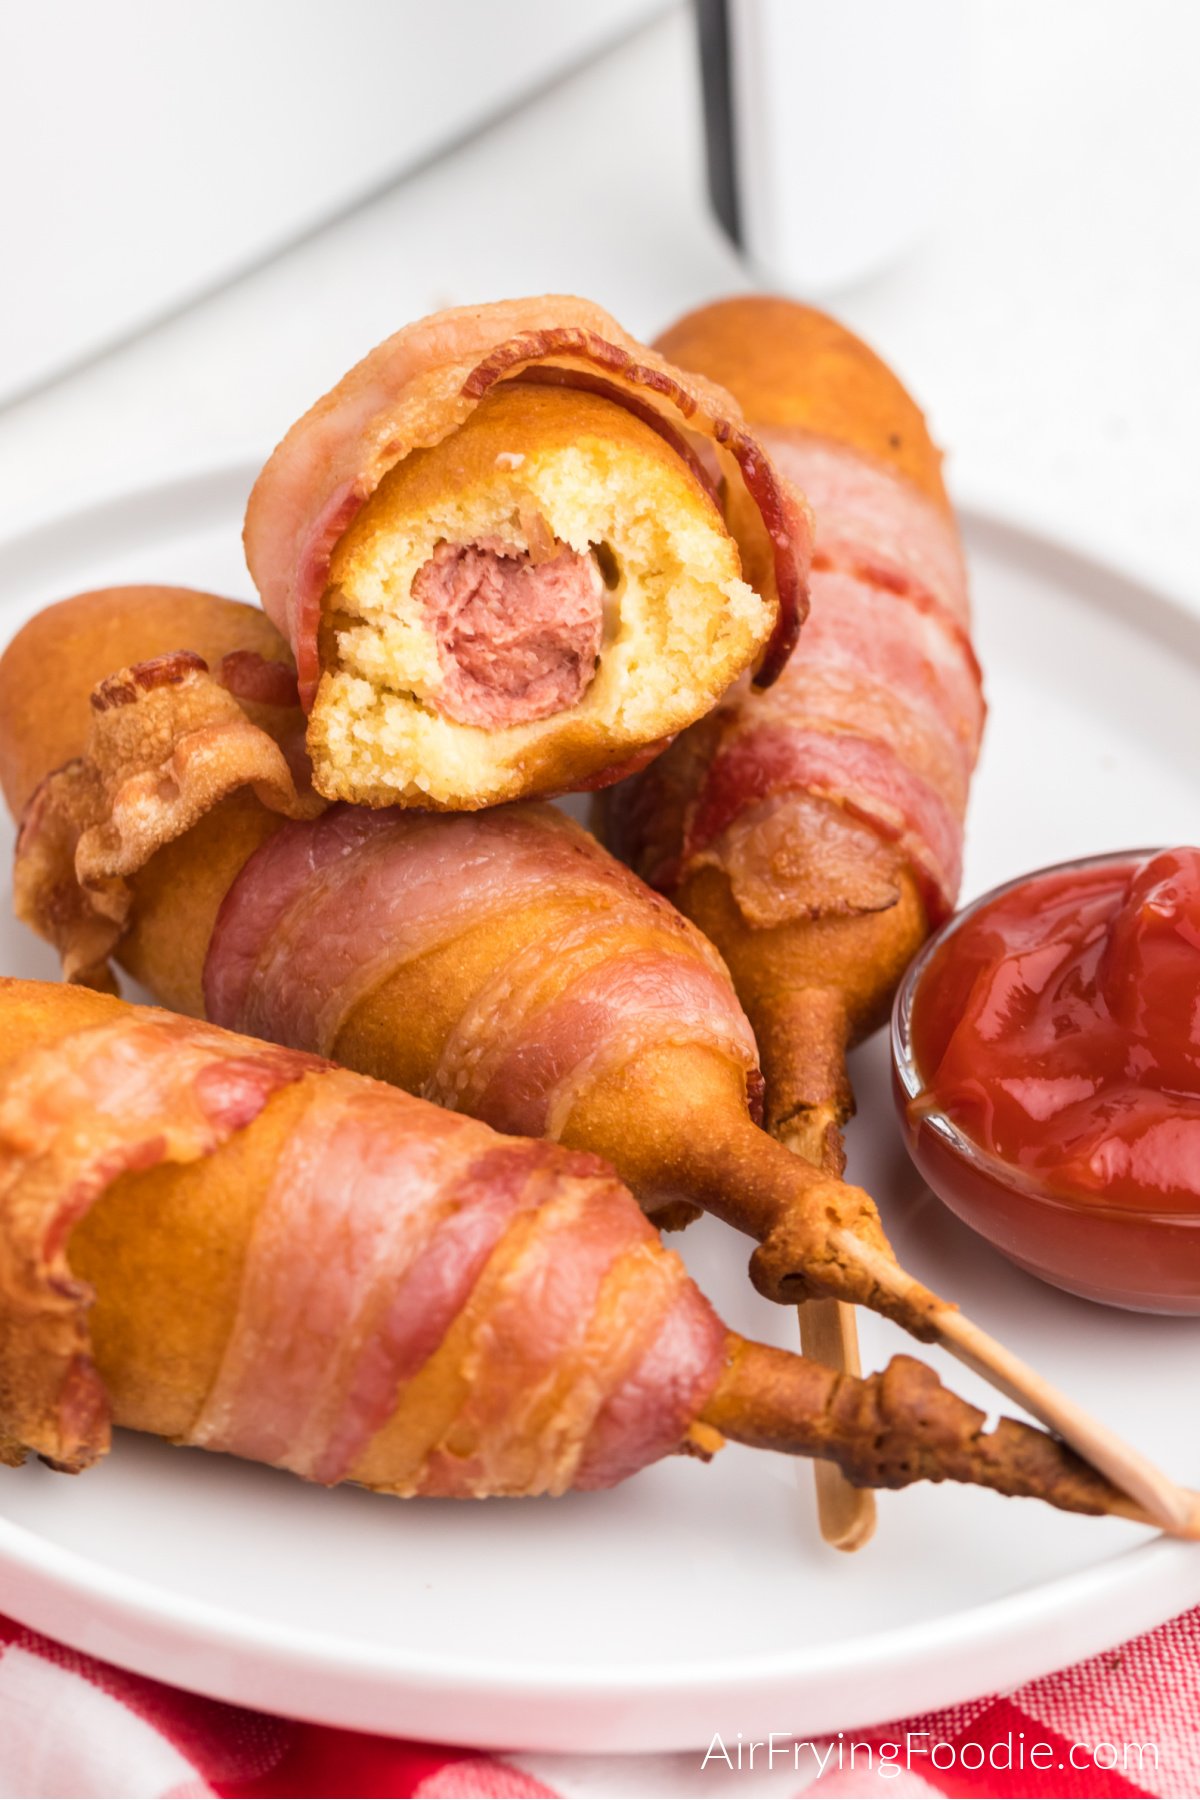 Bacon wrapped corn dogs stacked on a white plate and served with a side of ketchup. One air fried corn dog is missing a bite.